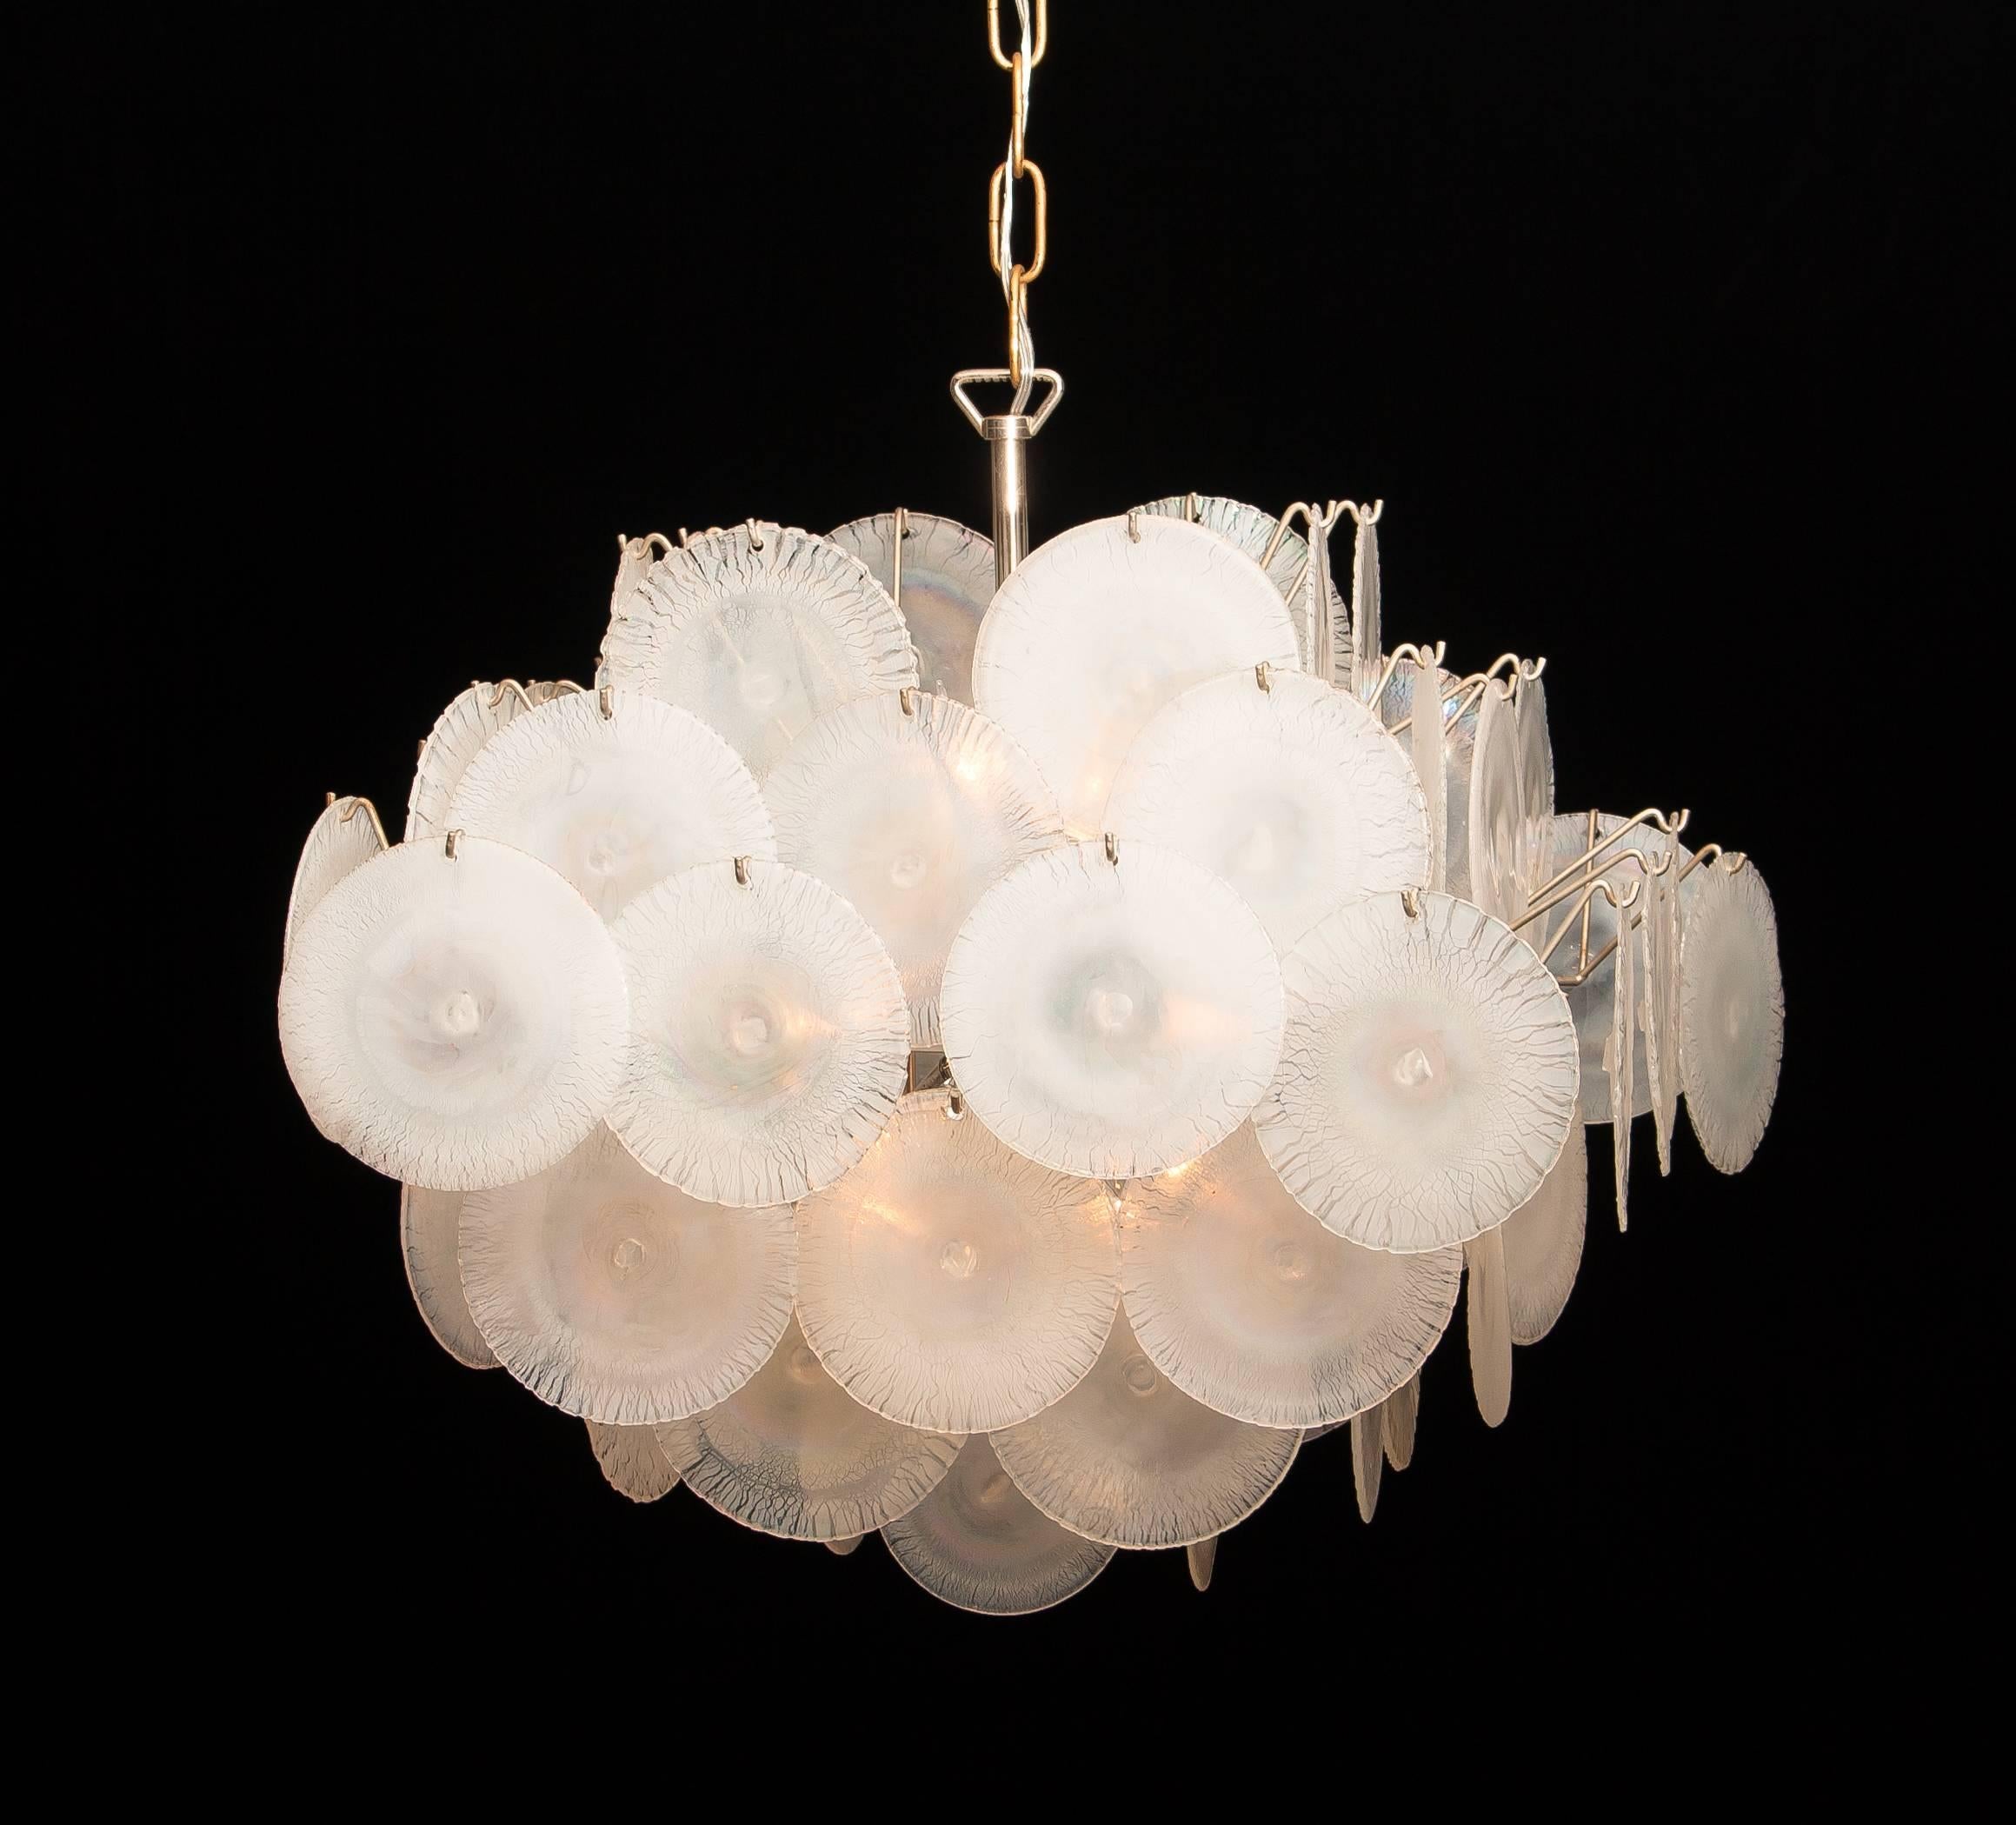 Mid-Century Modern Gino Vistosi Chandelier with White or Pearl Murano Crystal Discs